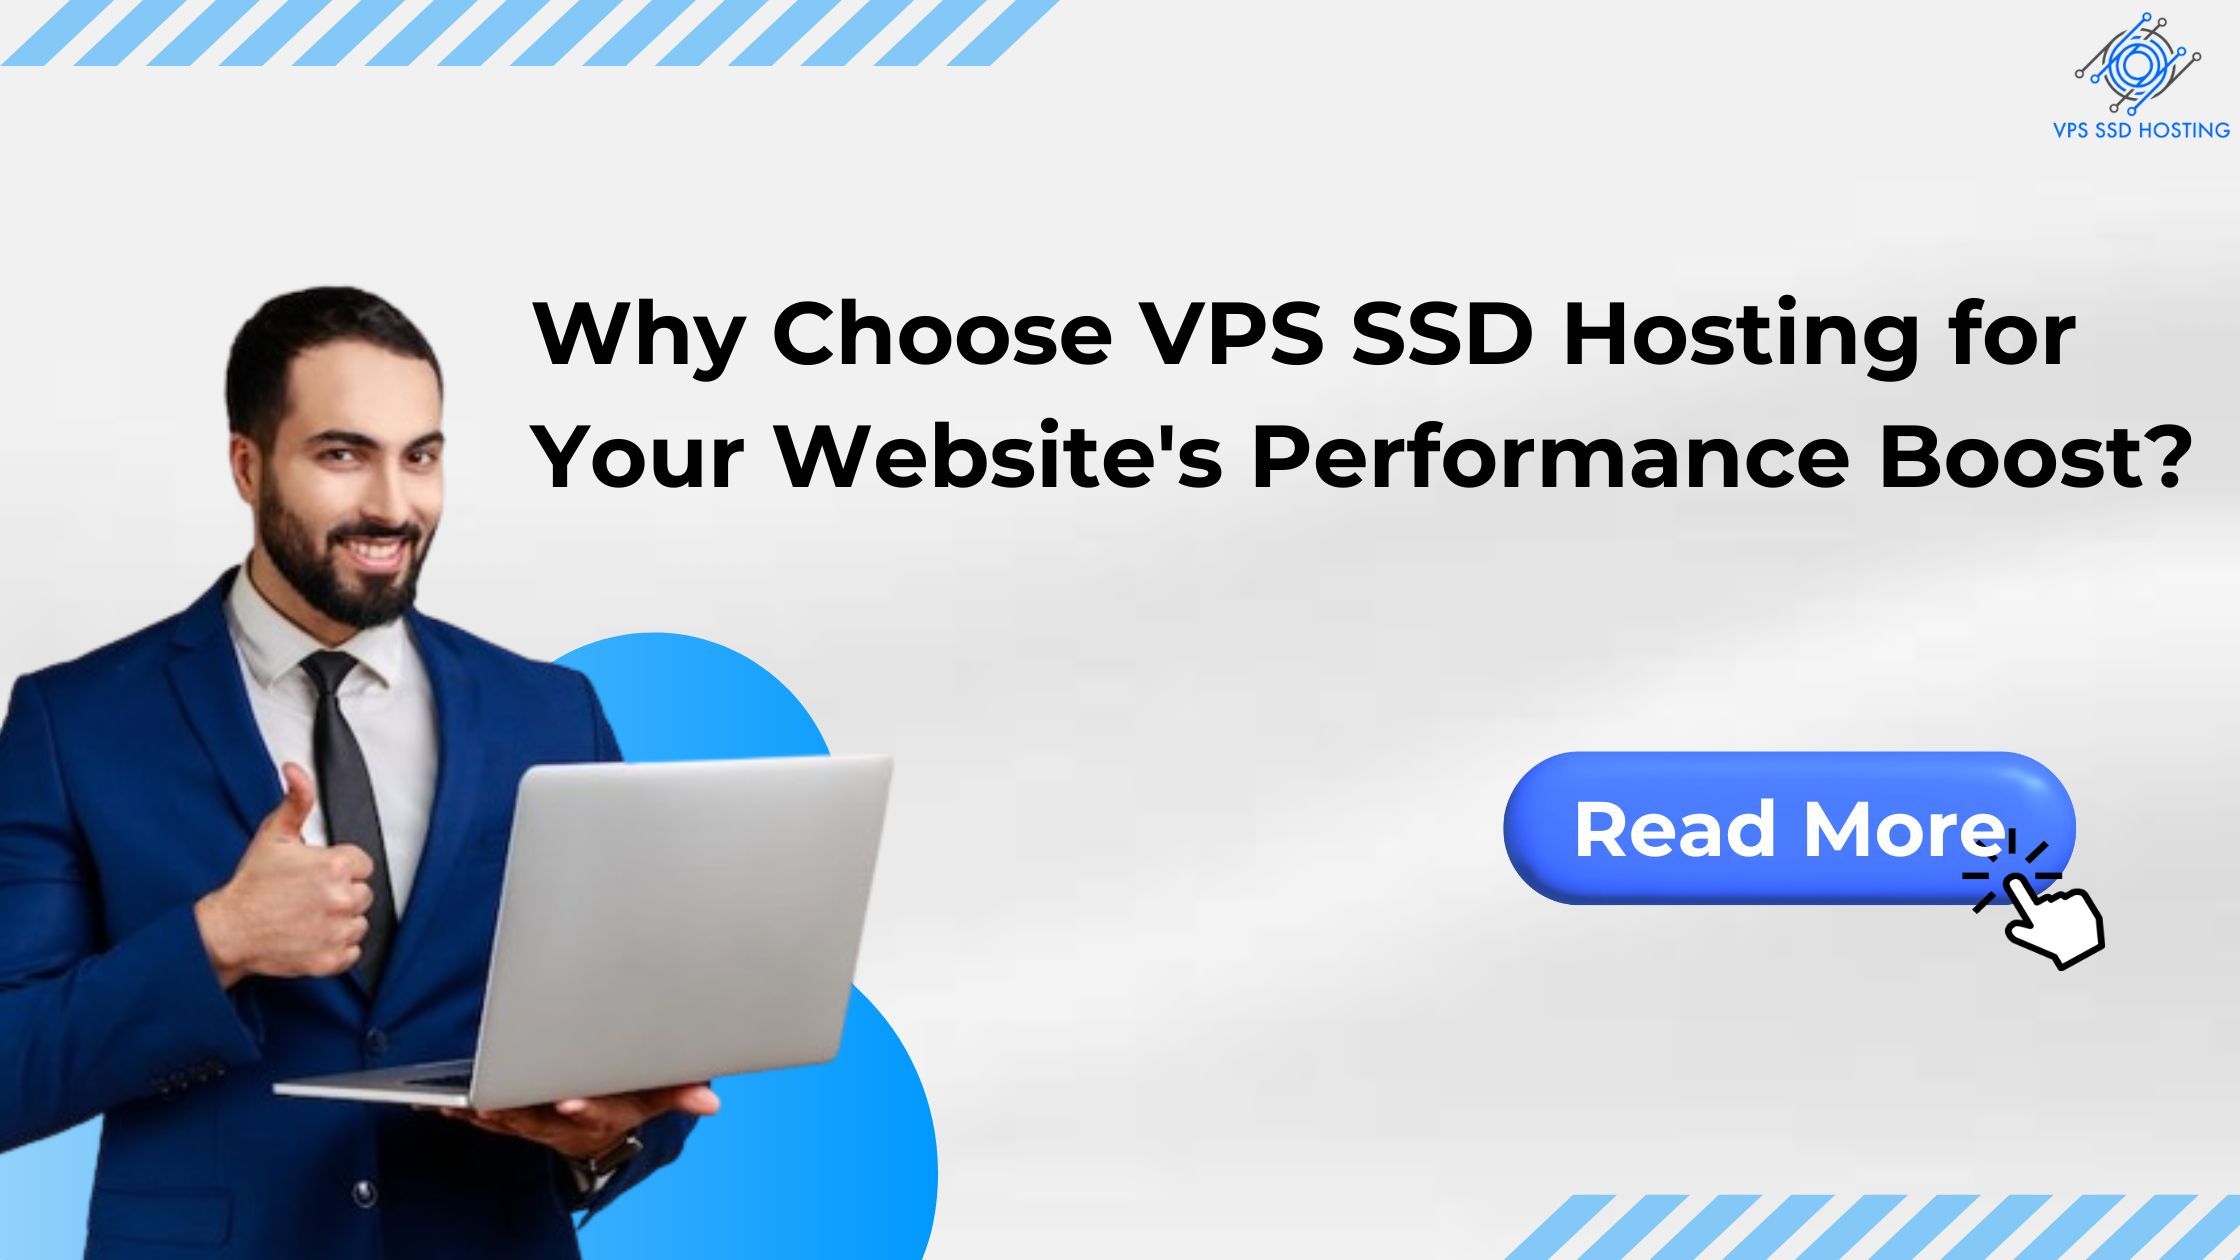 Why Choose VPS SSD Hosting for Your Website’s Performance Boost?